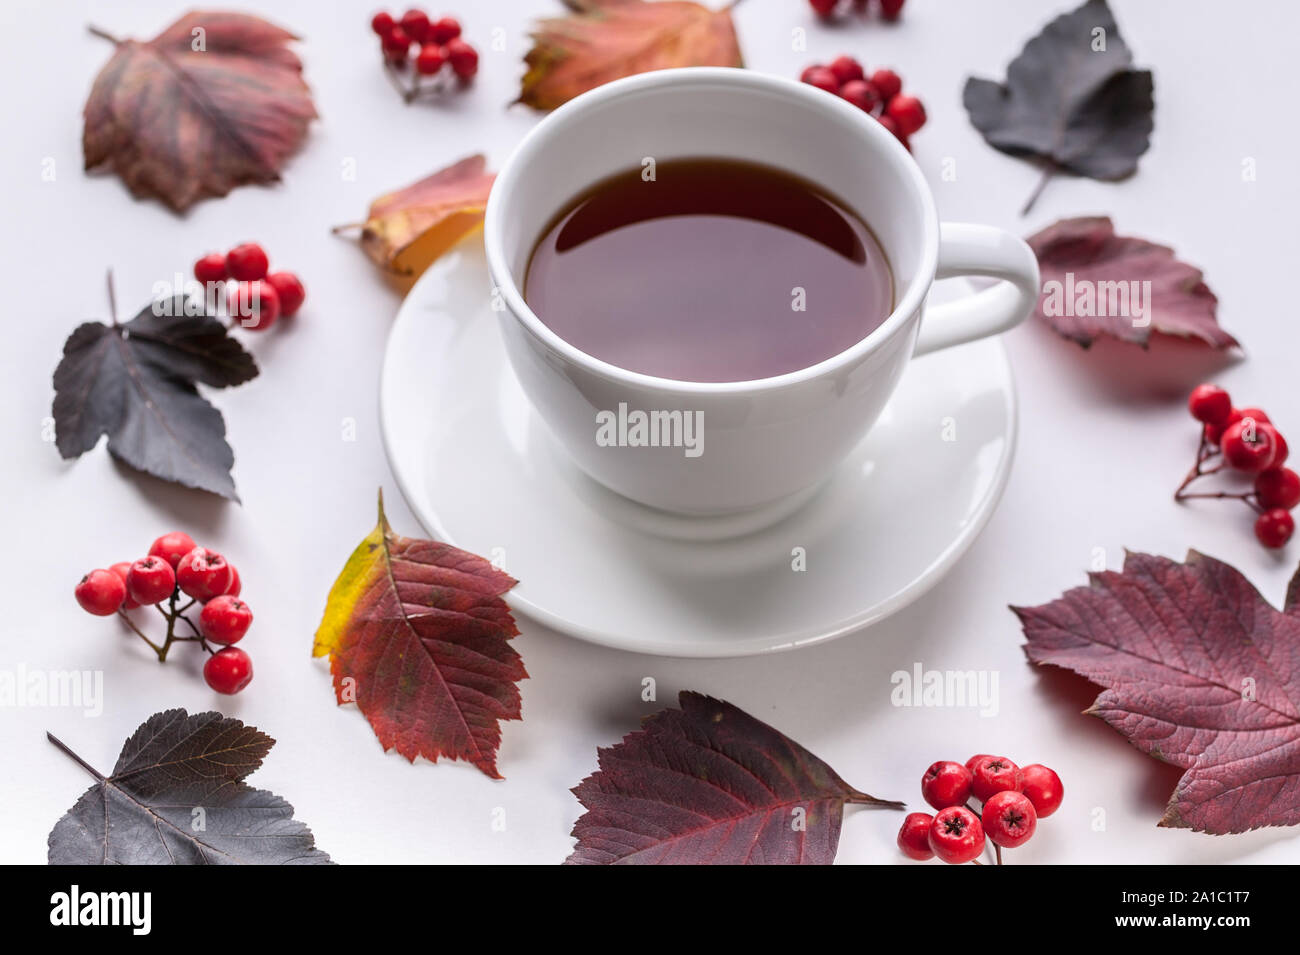 White Tea Mug, Leaves and berries. Autumn composition. Red foliage, ceramic teacup and small fruits on white background. Fallen leaf and rowanbery fla Stock Photo